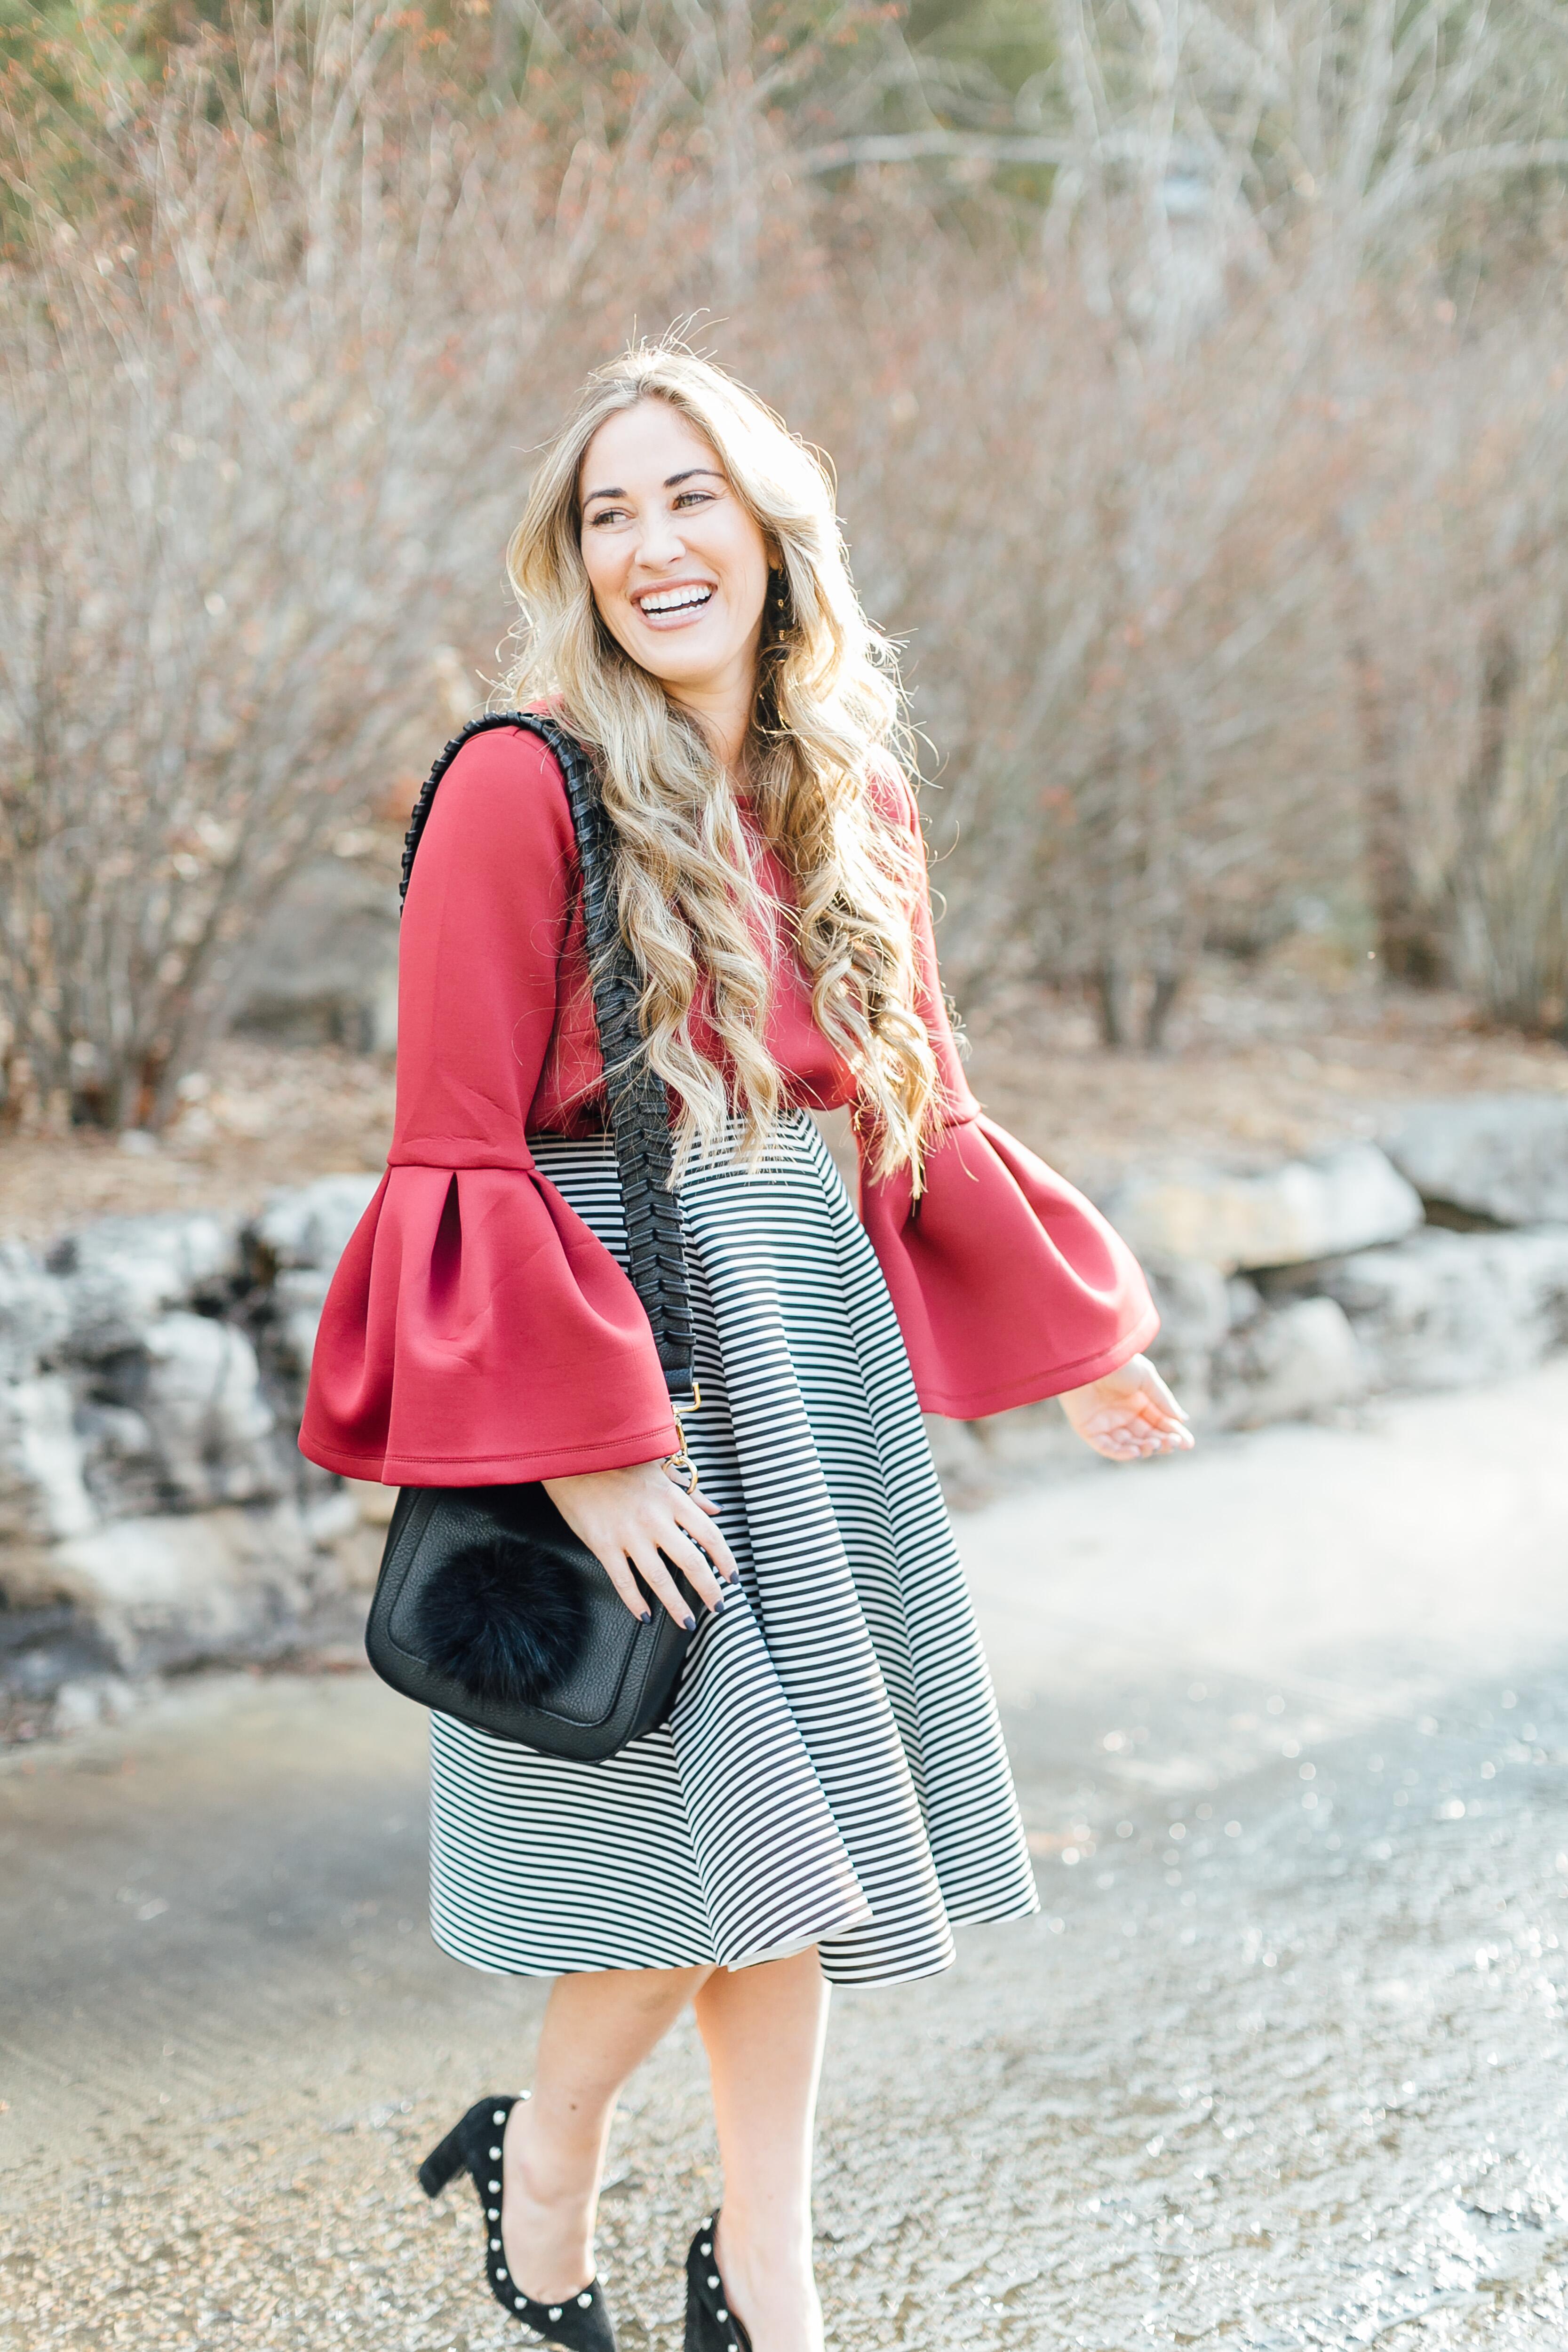 Holiday Style by East Memphis fashion blogger Walking in Memphis in High Heels